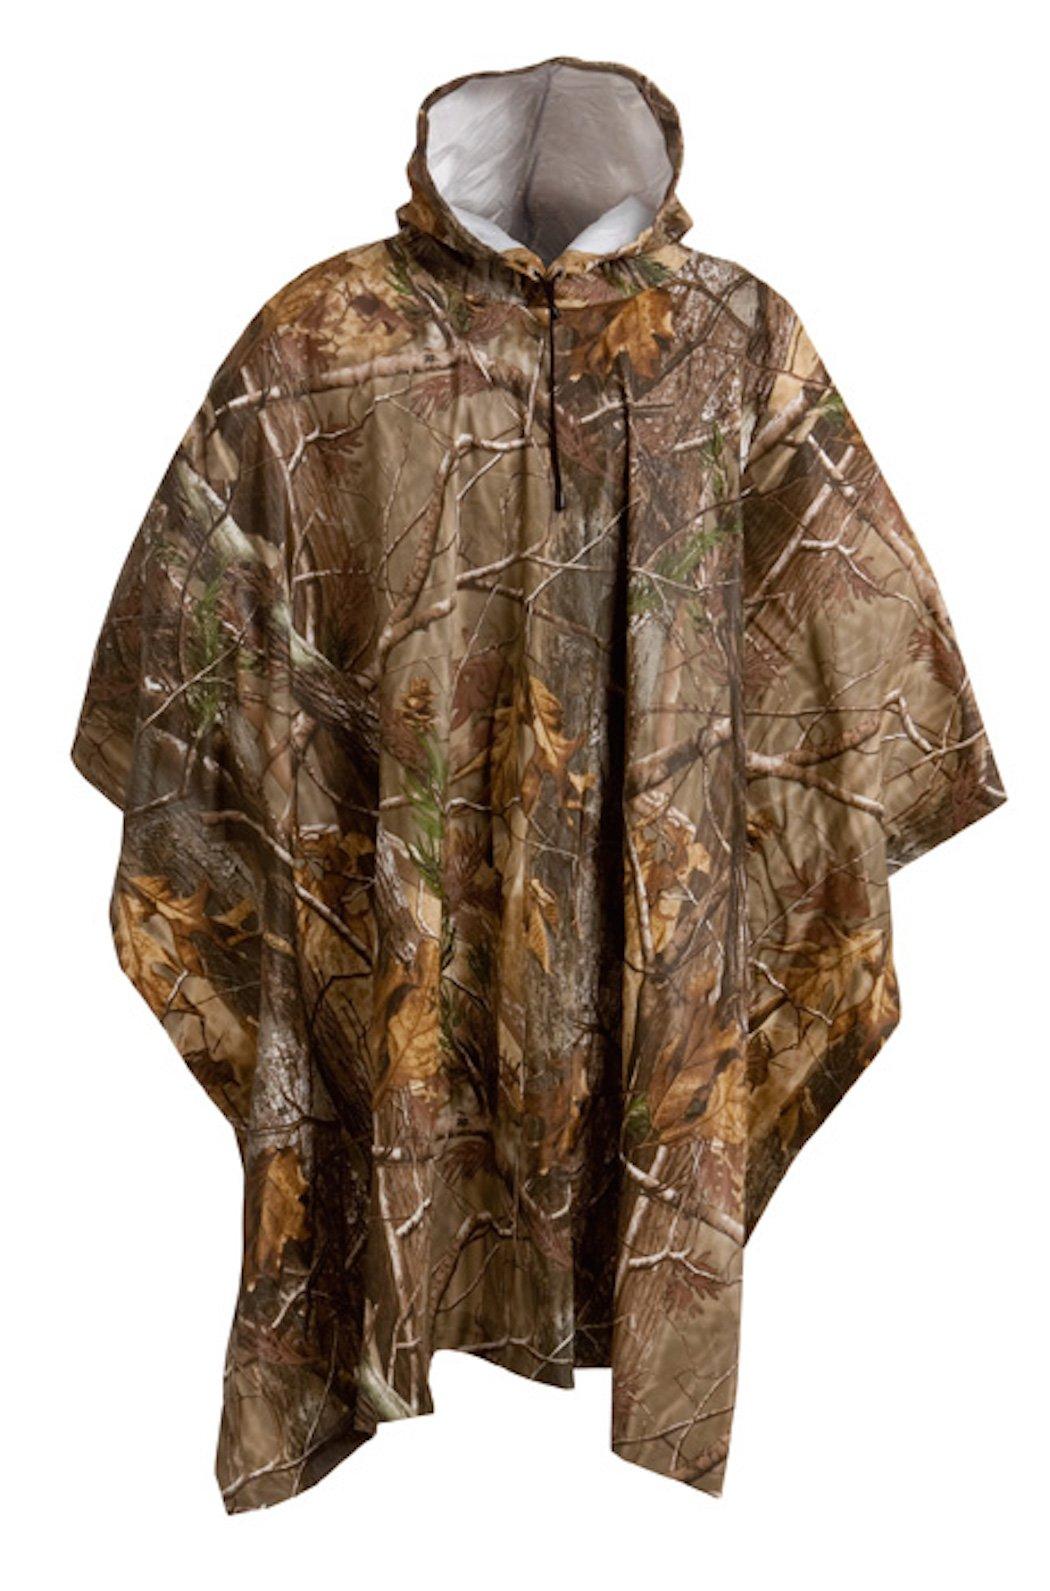 Camouflage Rain Poncho in Realtree AP